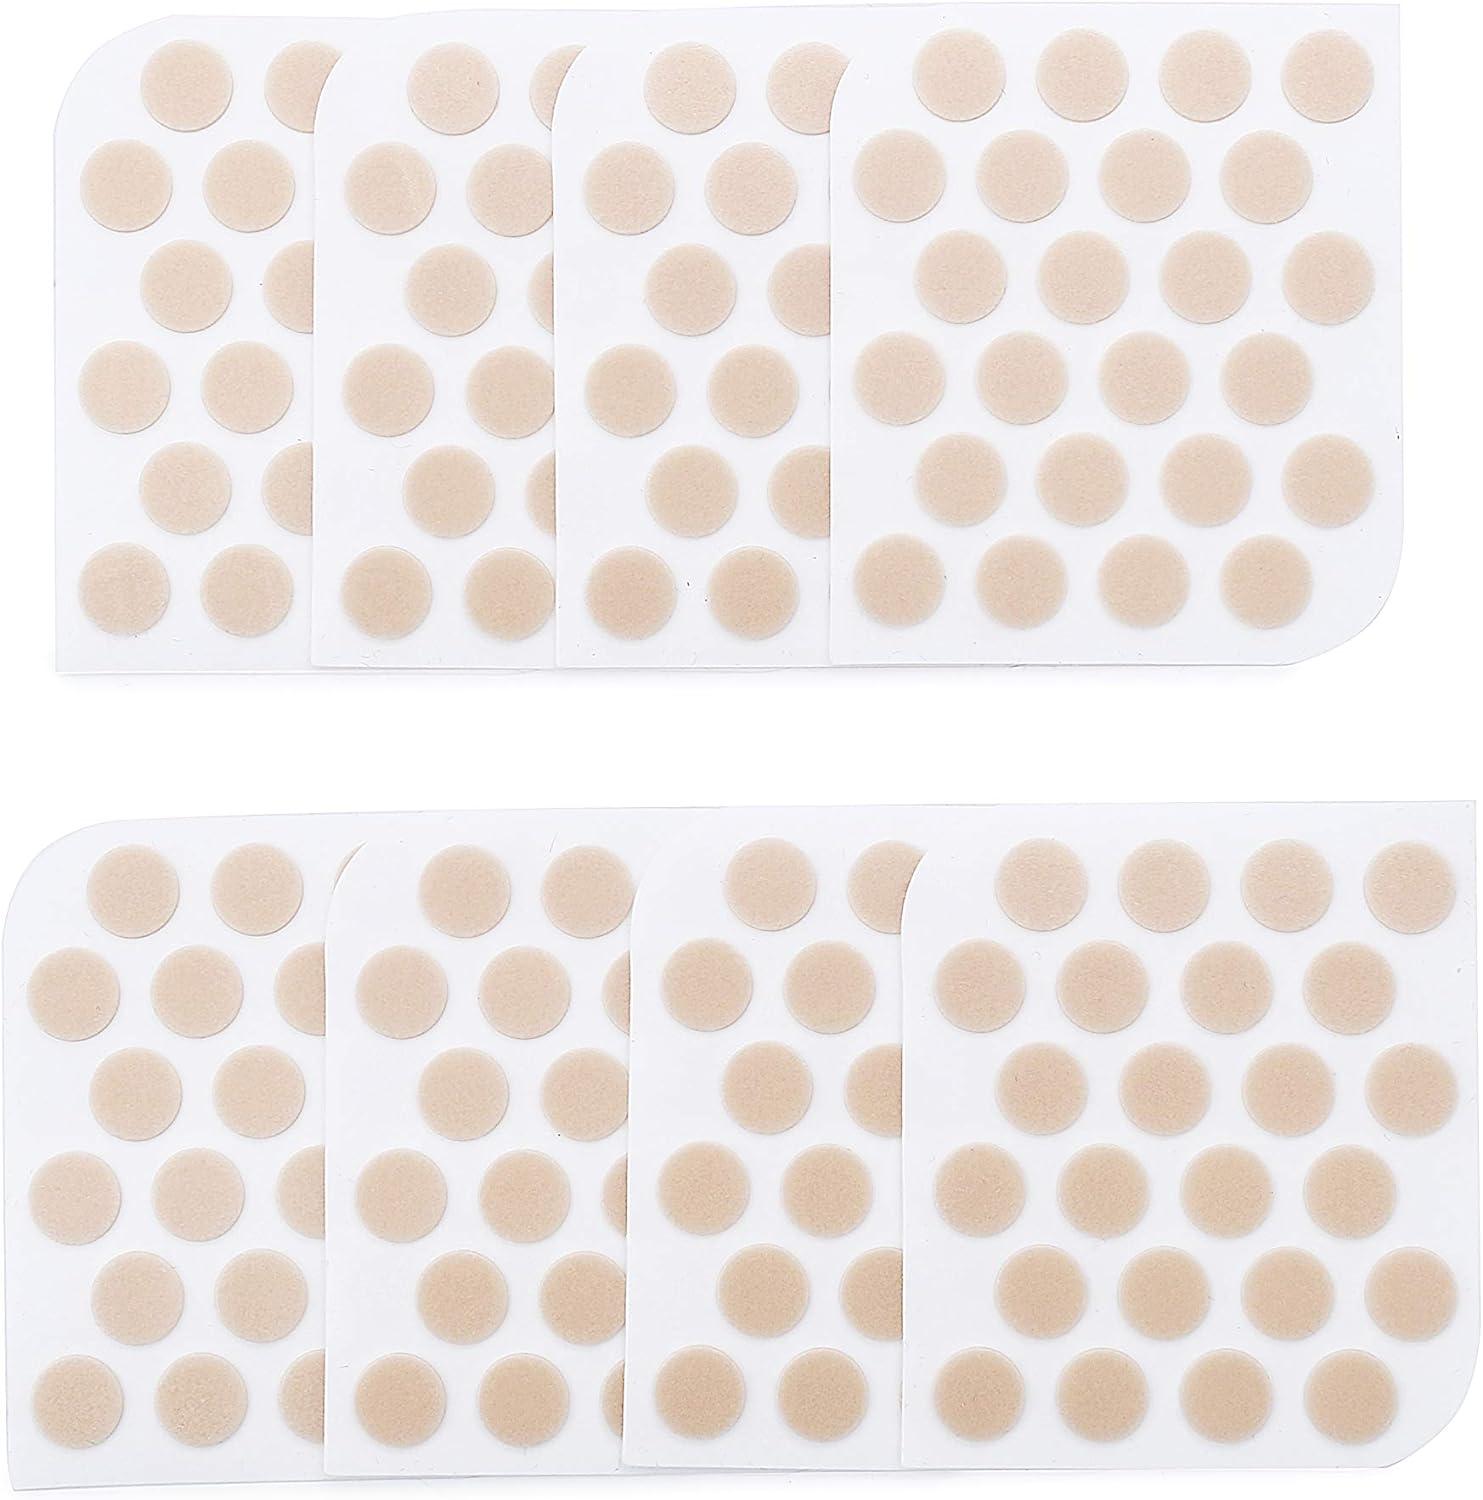 AOOOWER 300PCS Earring Support Patches Earring Lifters Clear Skin Color  Waterproof Earring Ear Lobe Support Patch for Earring 